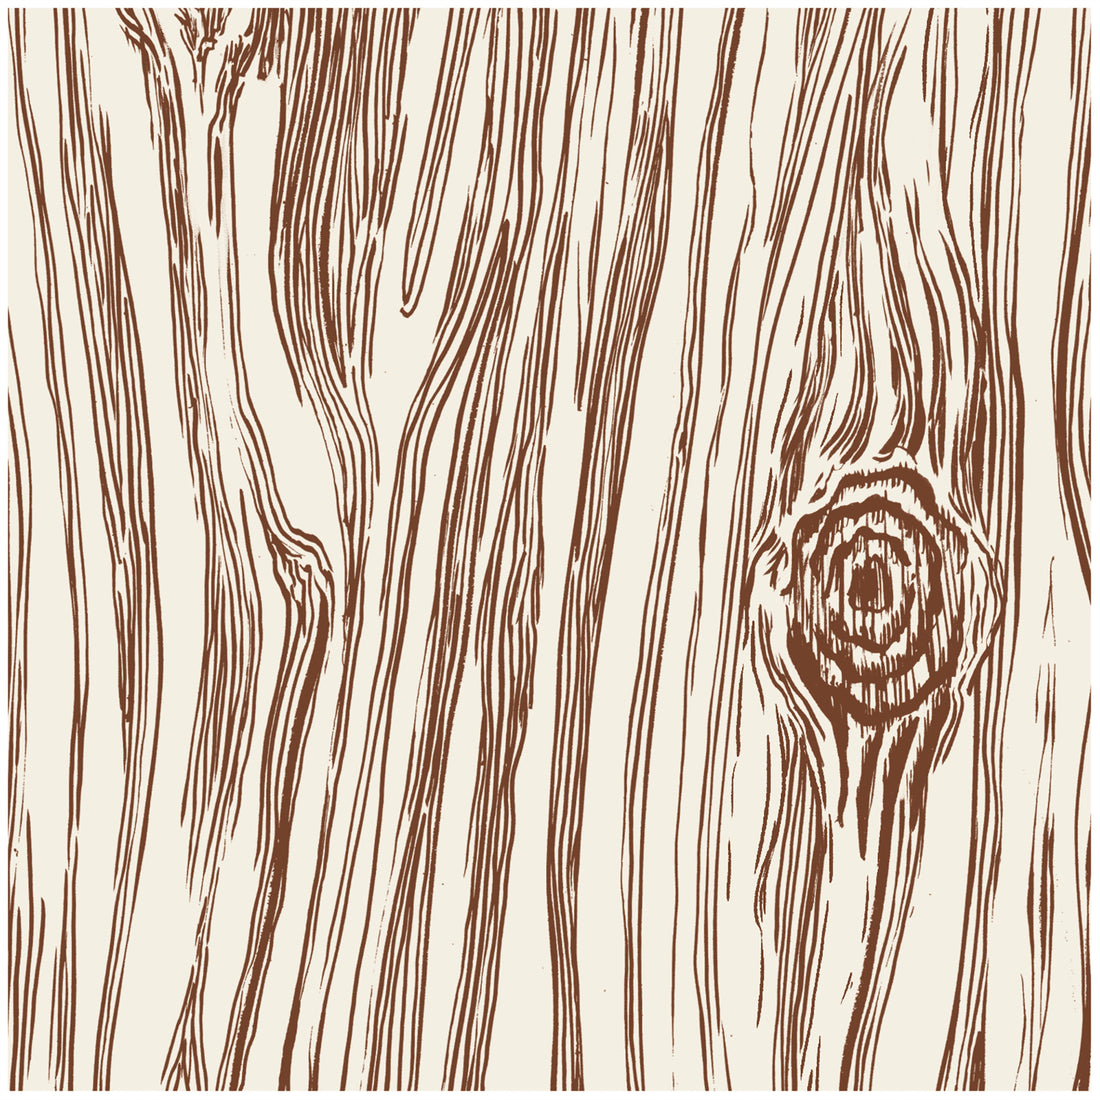 A square cocktail napkin featuring illustrated wood grain line art in brown over a white background.